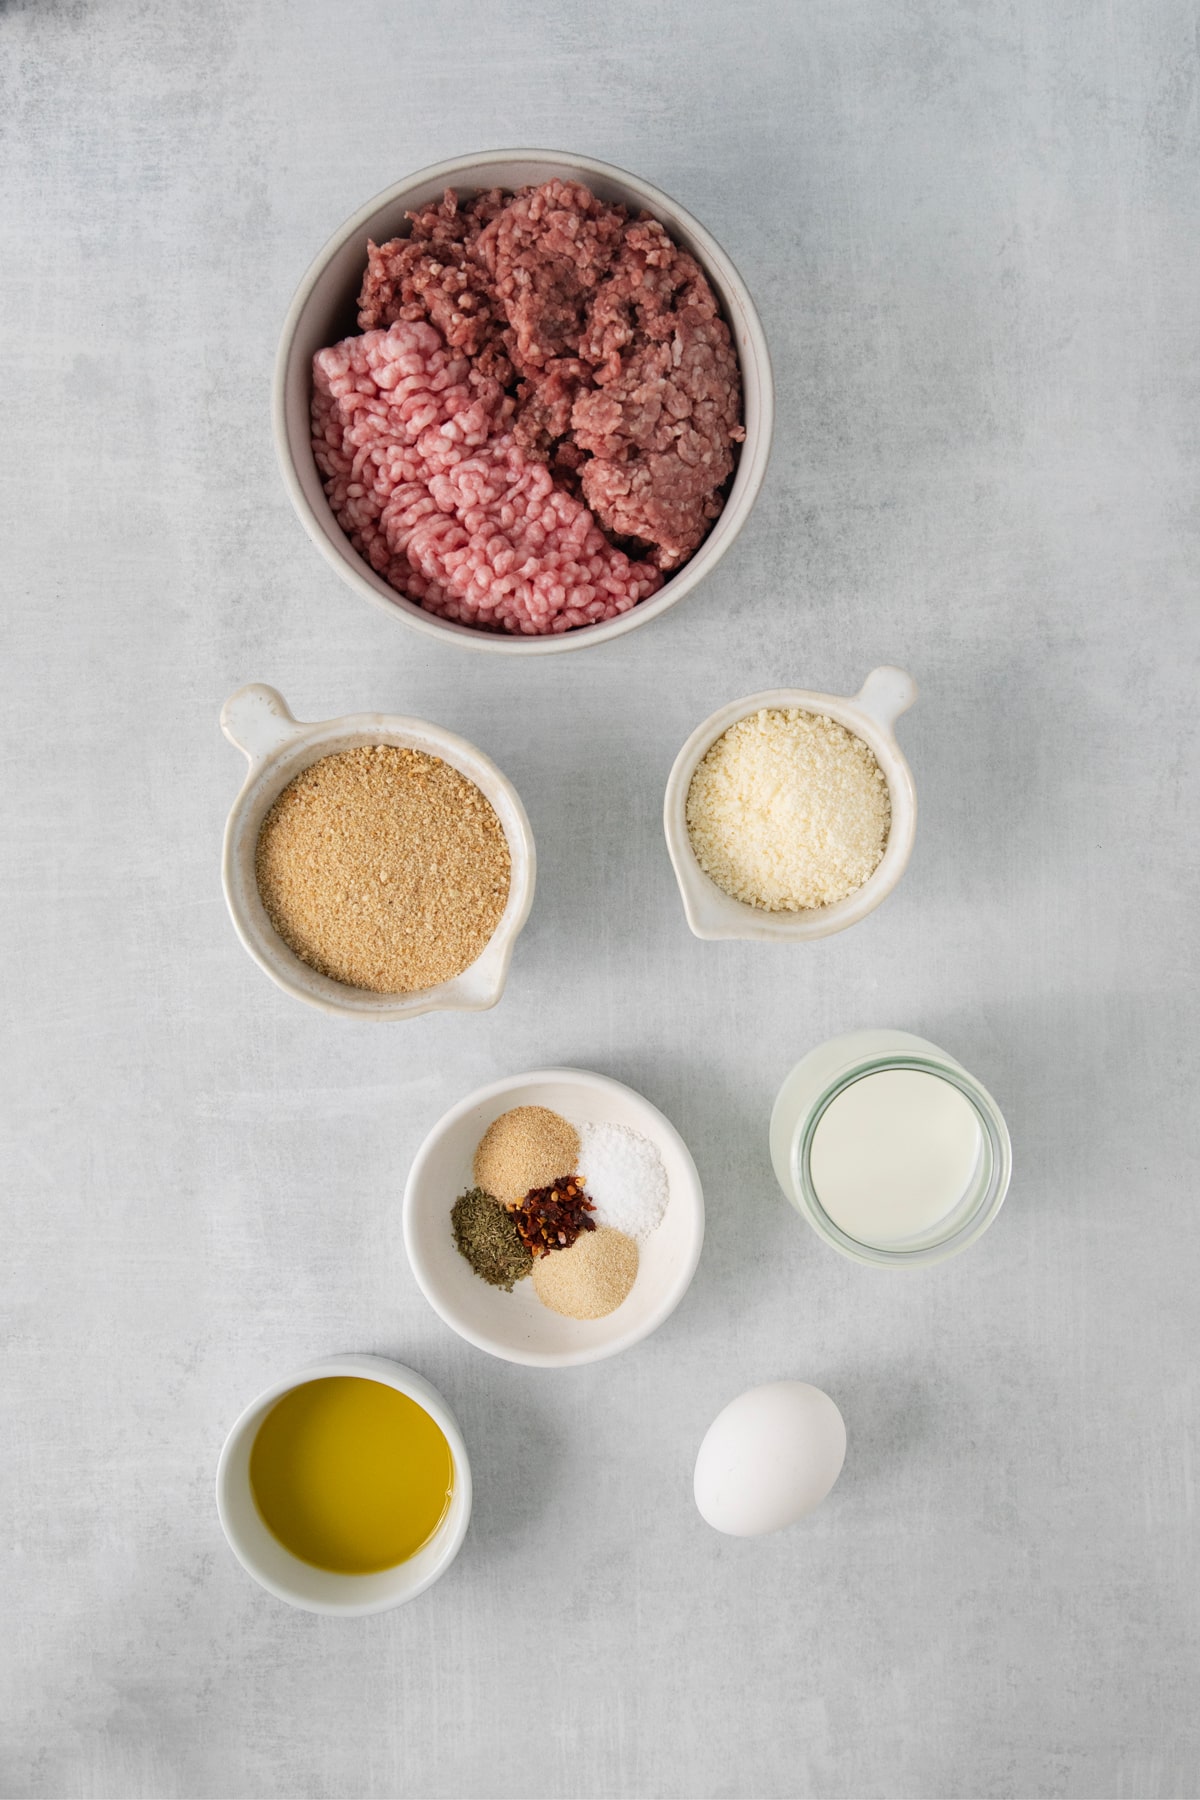 Ingredients for Italian Wedding Soup meatballs include large egg, milk, breadcrumbs, parmesan, onion powder, garlic powder, salt, dried Italian seasoning, red pepper flakes. ground beef, ground pork, and olive oil.